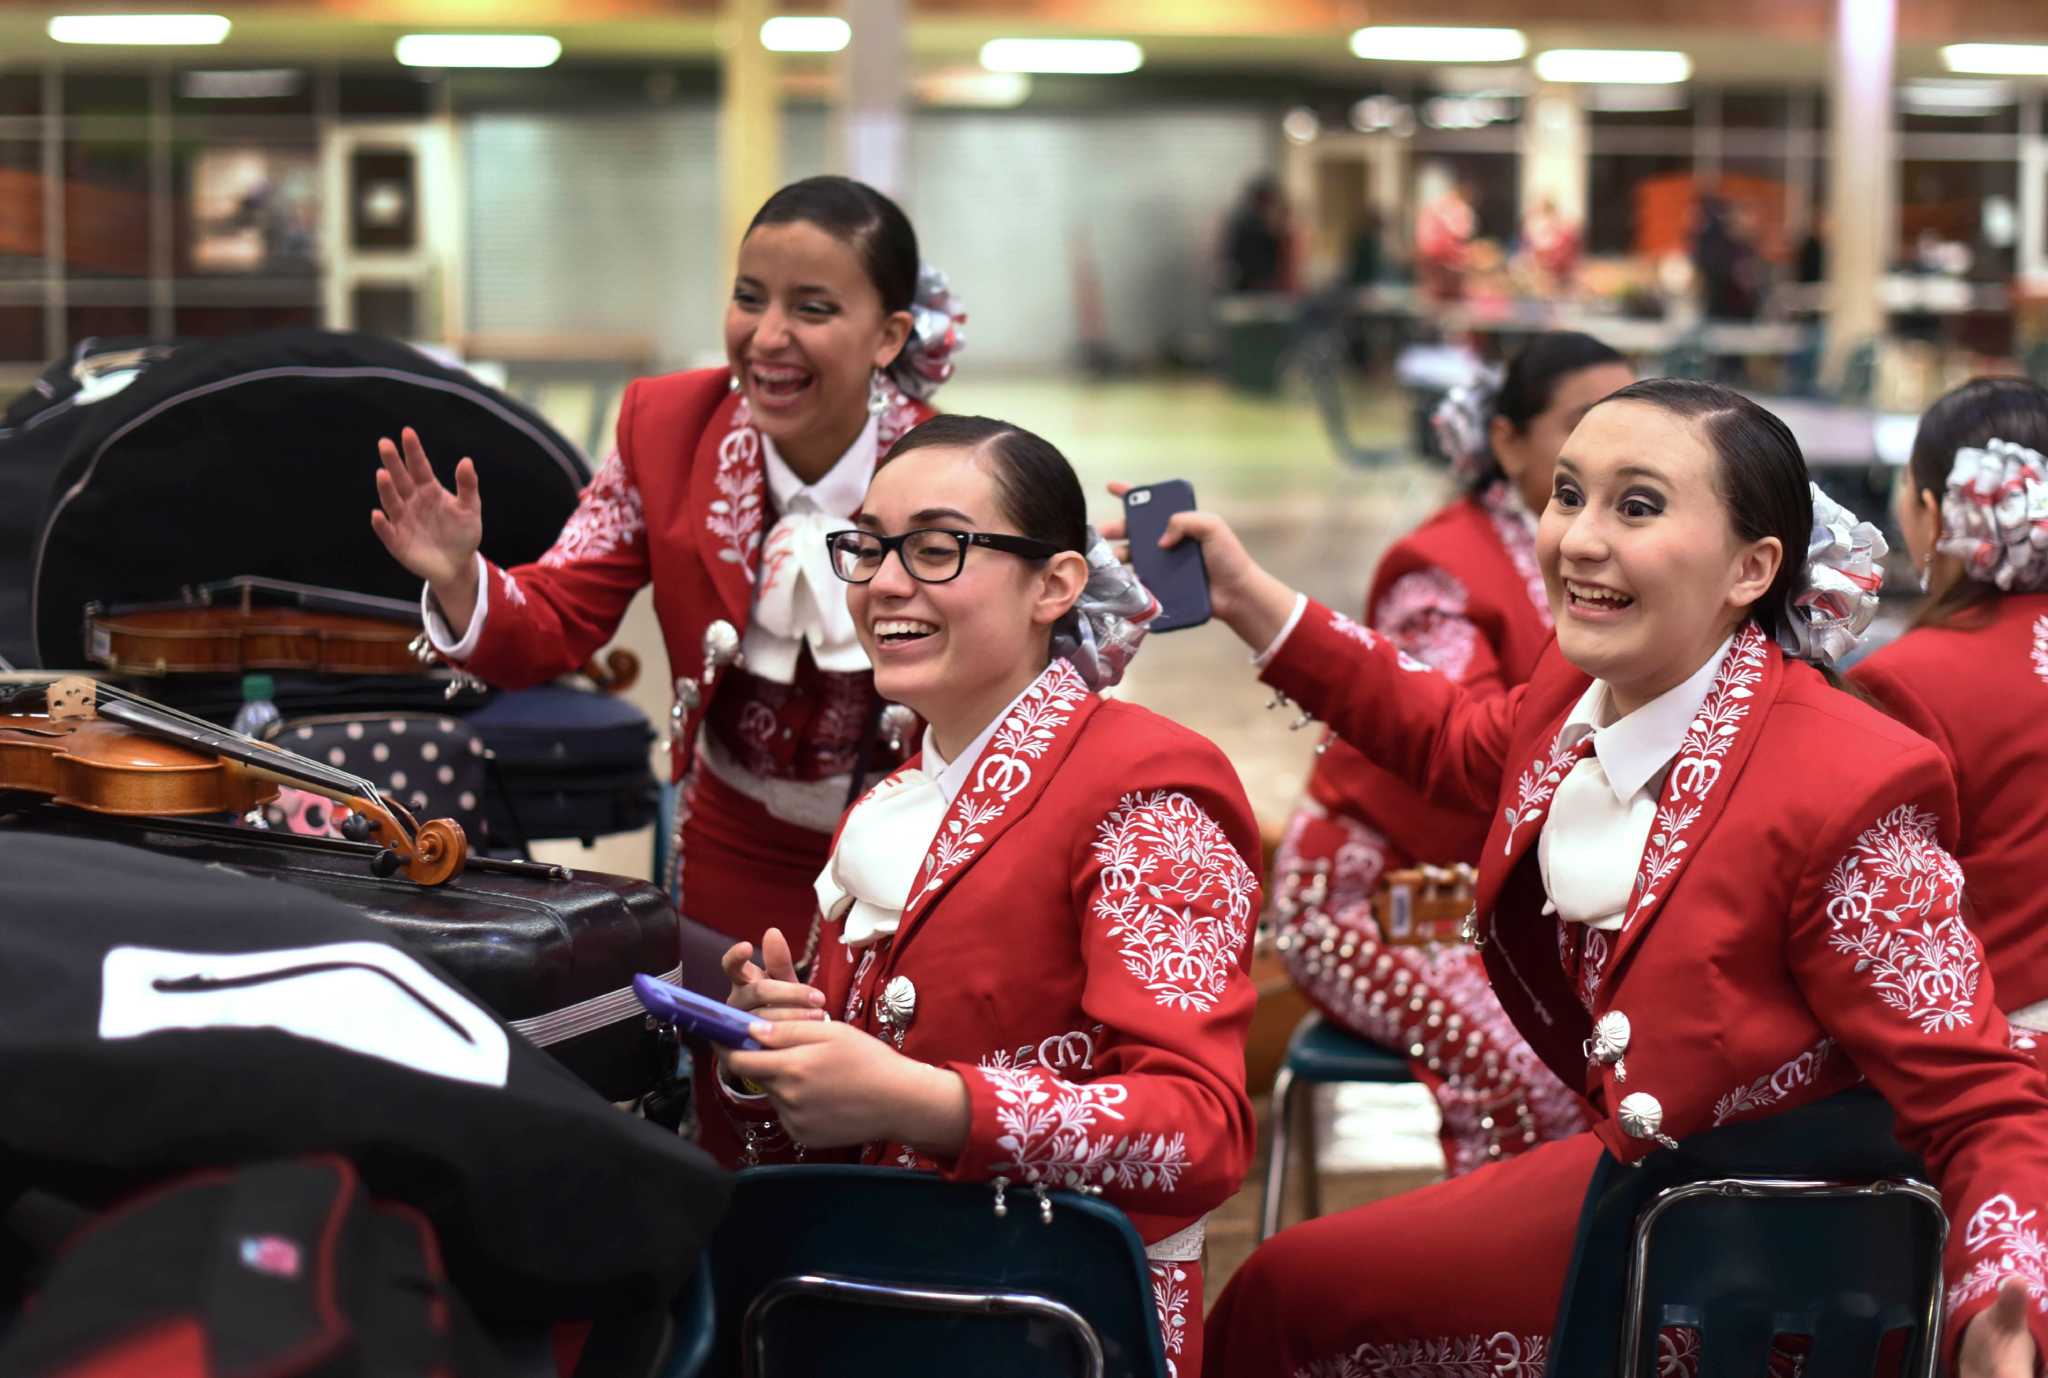 UIL mariachi festival in San Antonio attracts high schools from around